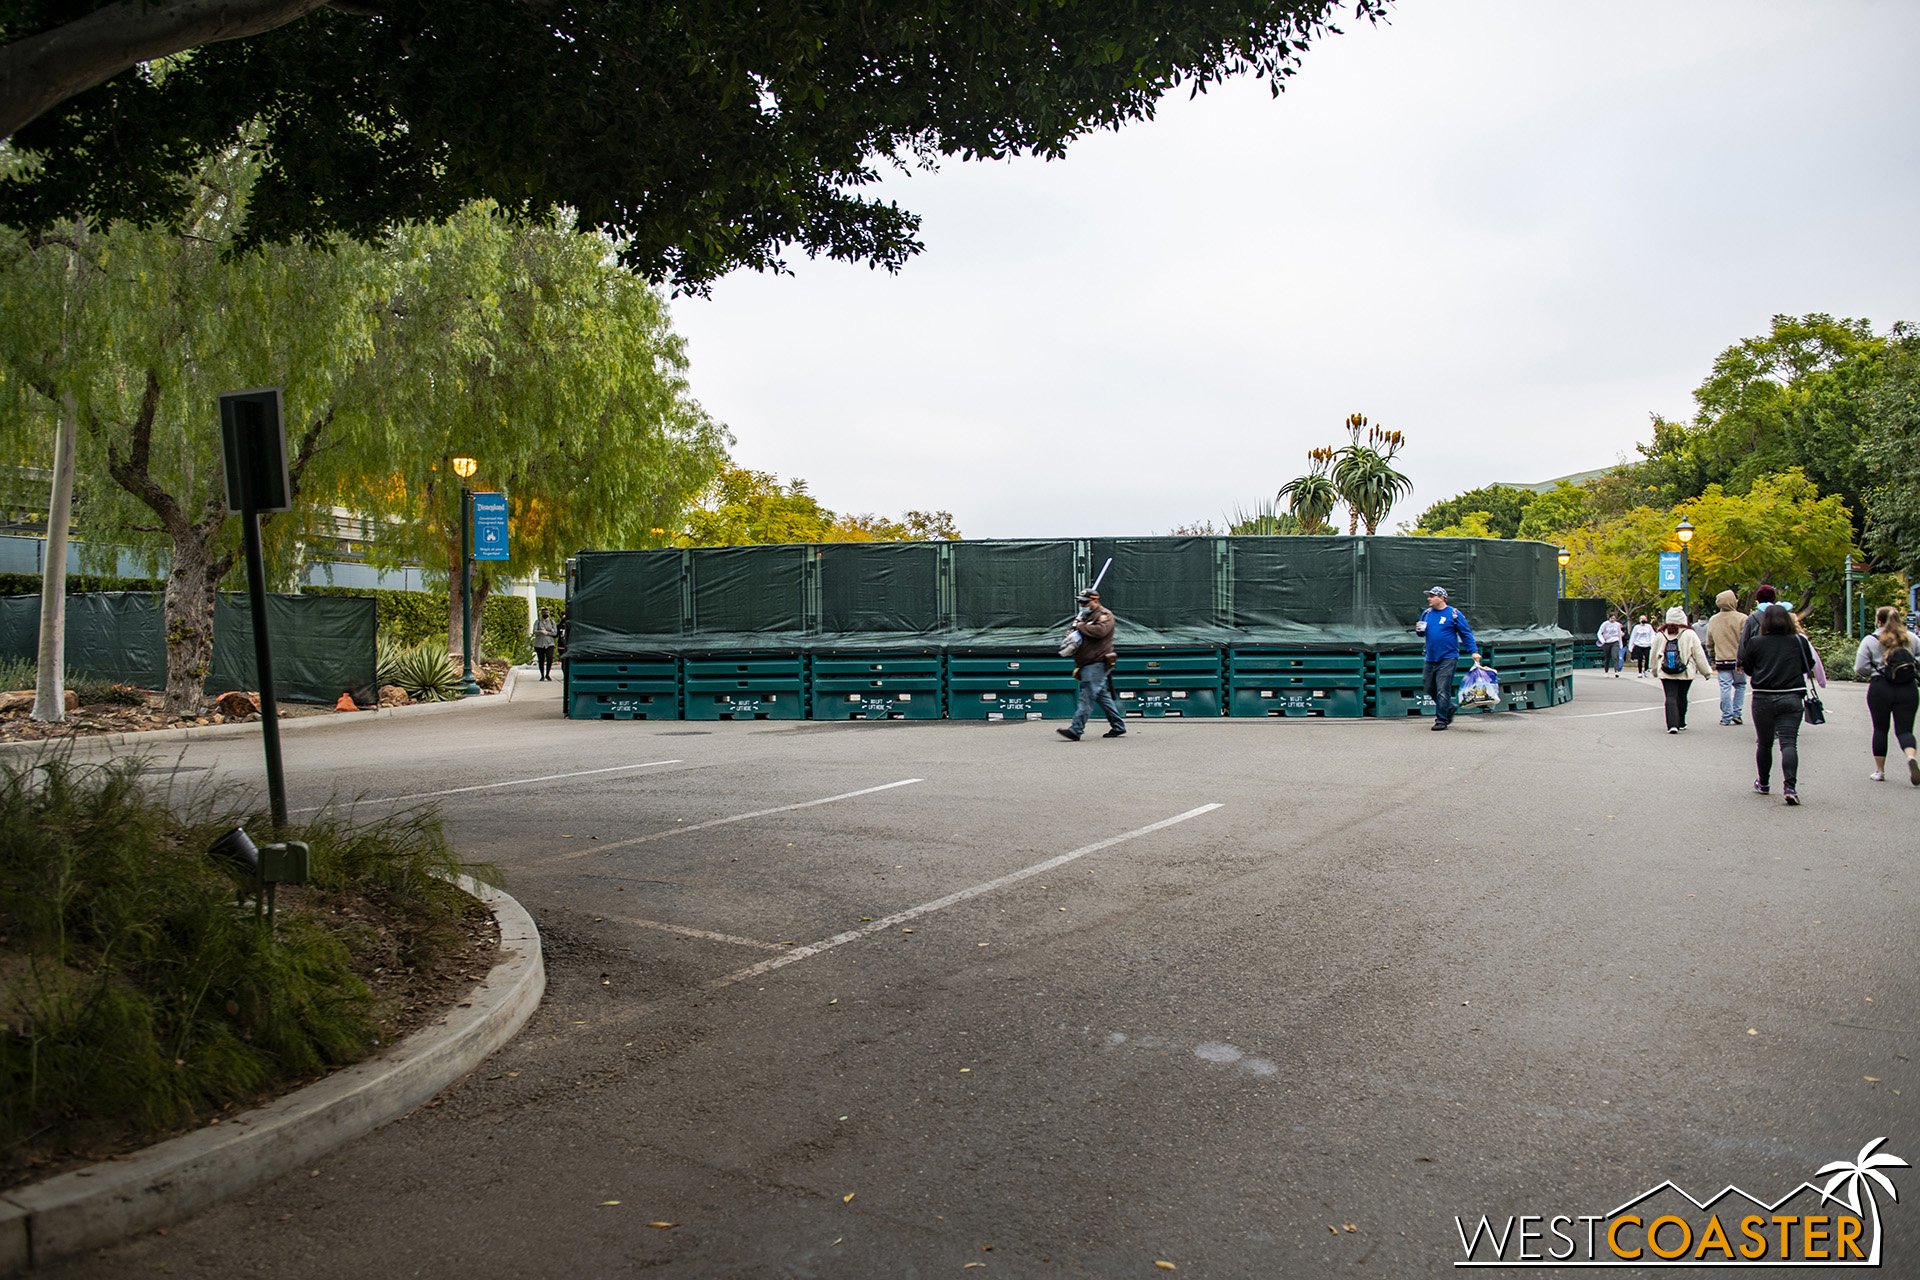  On a recent visit at the beginning of this month, barriers were up in this area. 